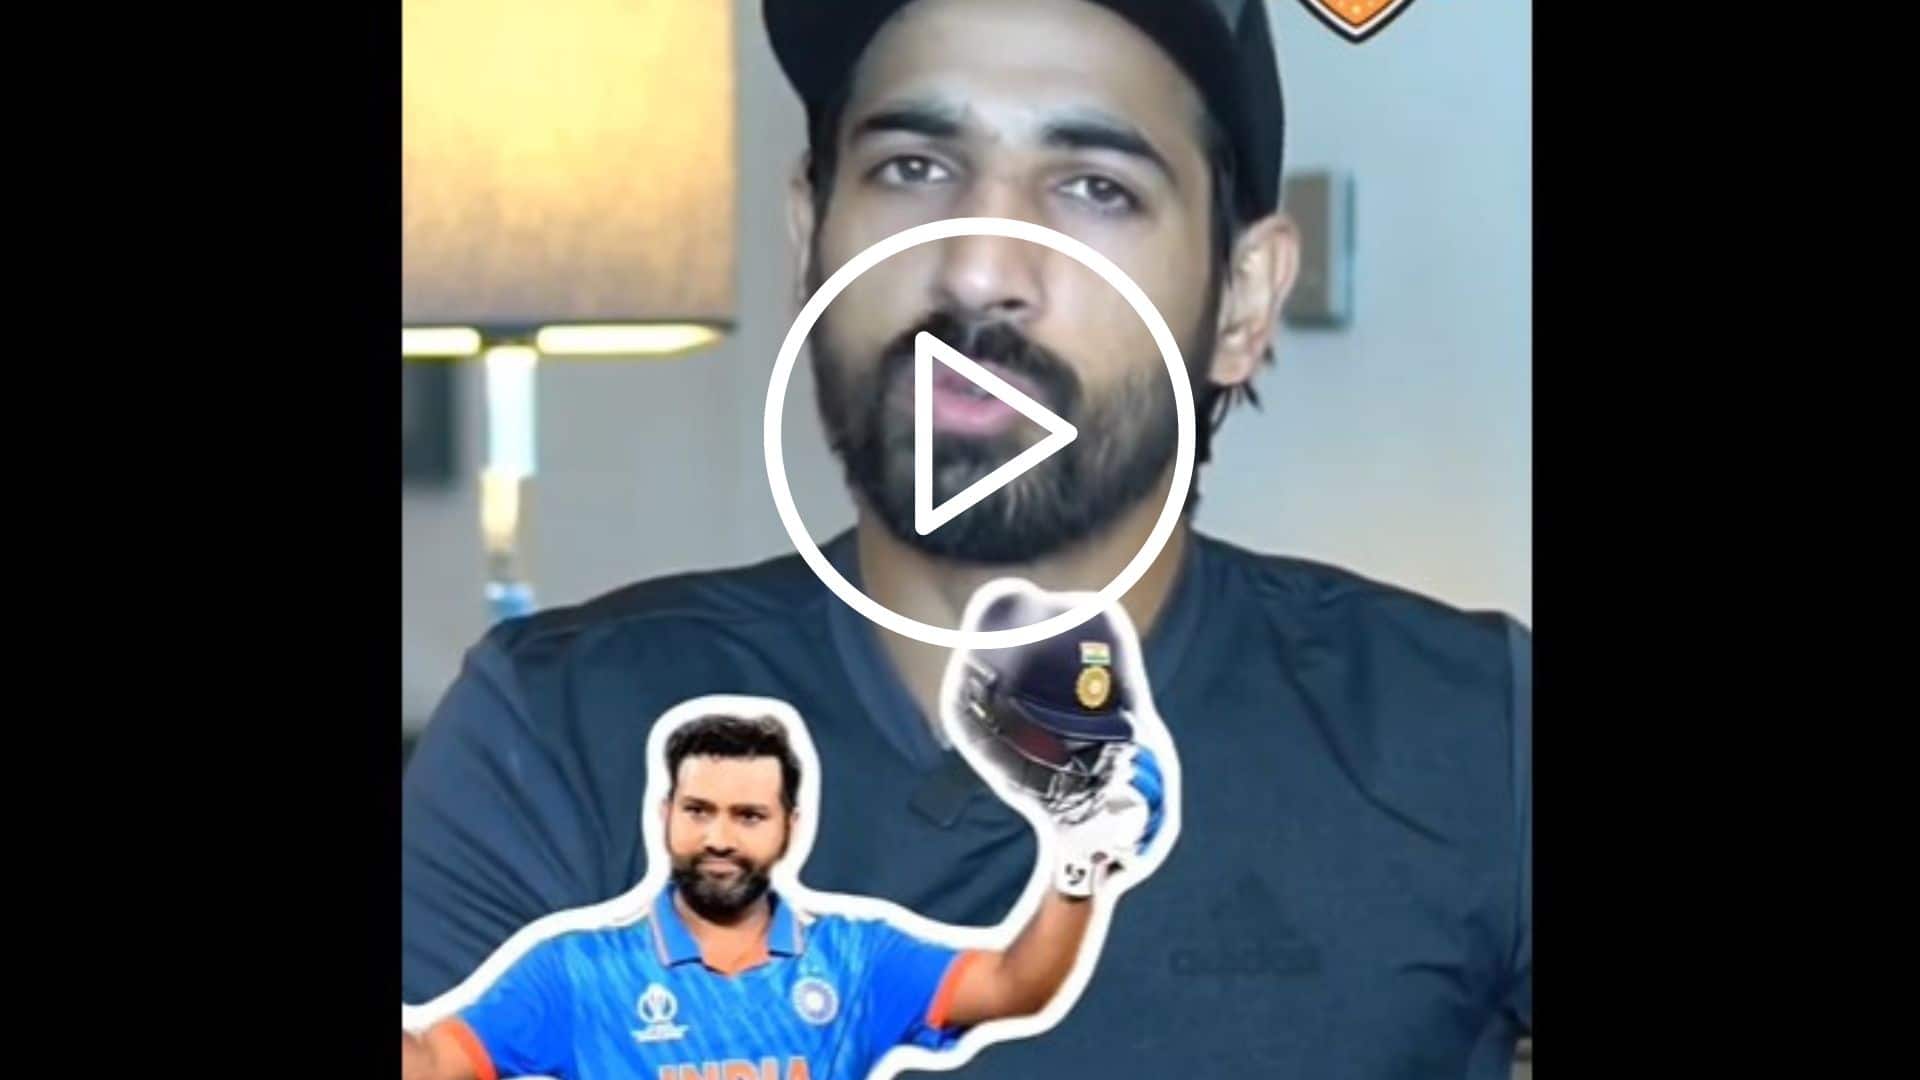 [Watch] Afghanistan's Star All-Rounder Names Rohit Sharma As His Cricketing Idol